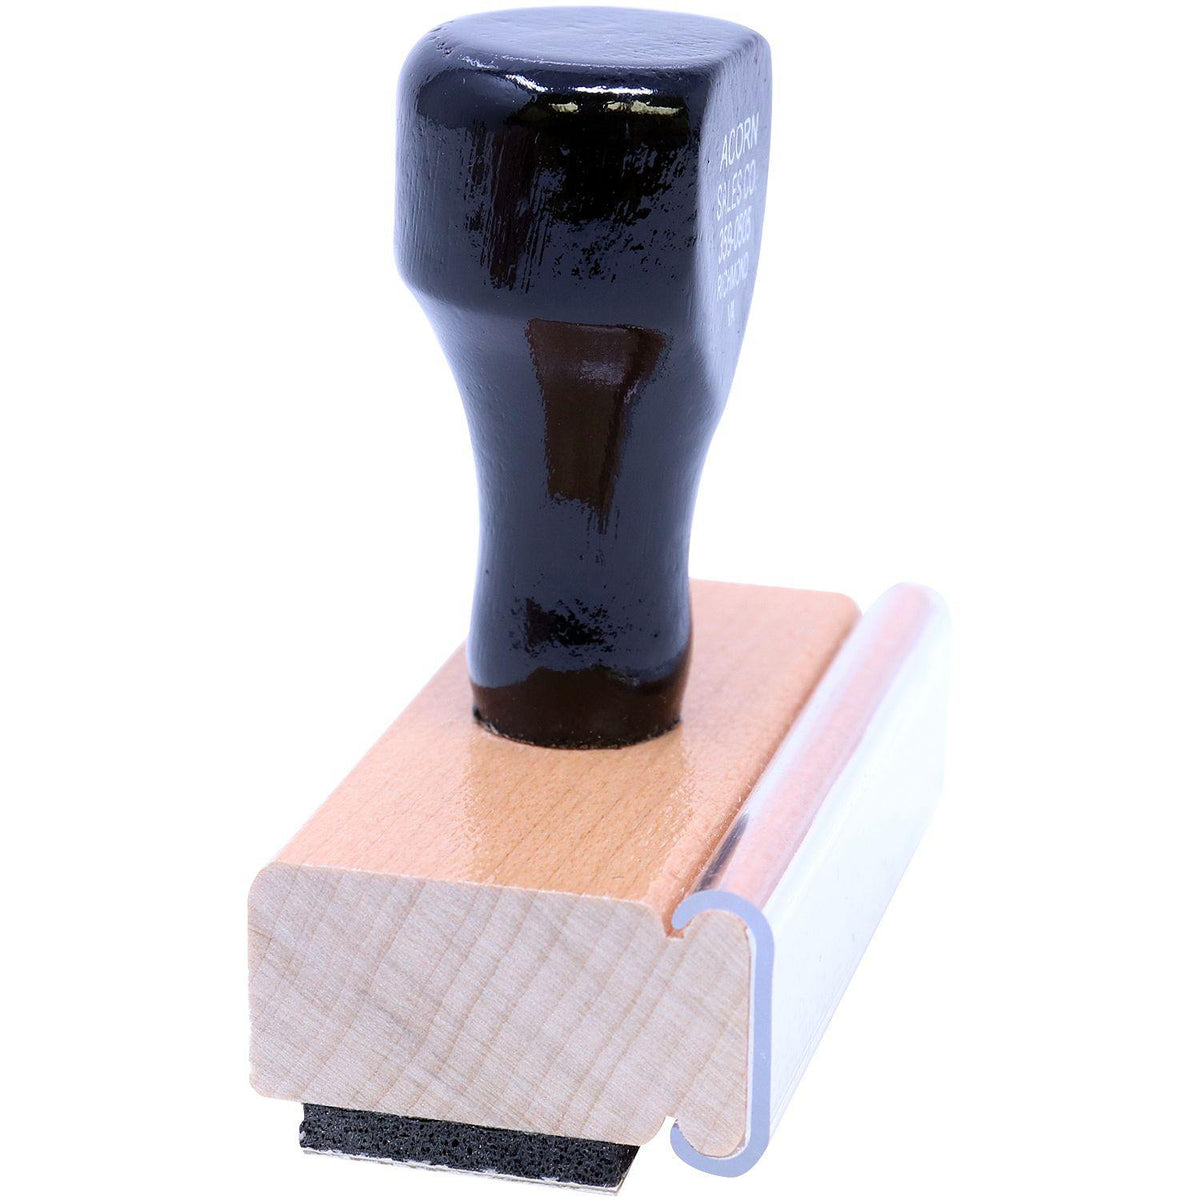 Side View of Destroy Debit Rubber Stamp at an Angle